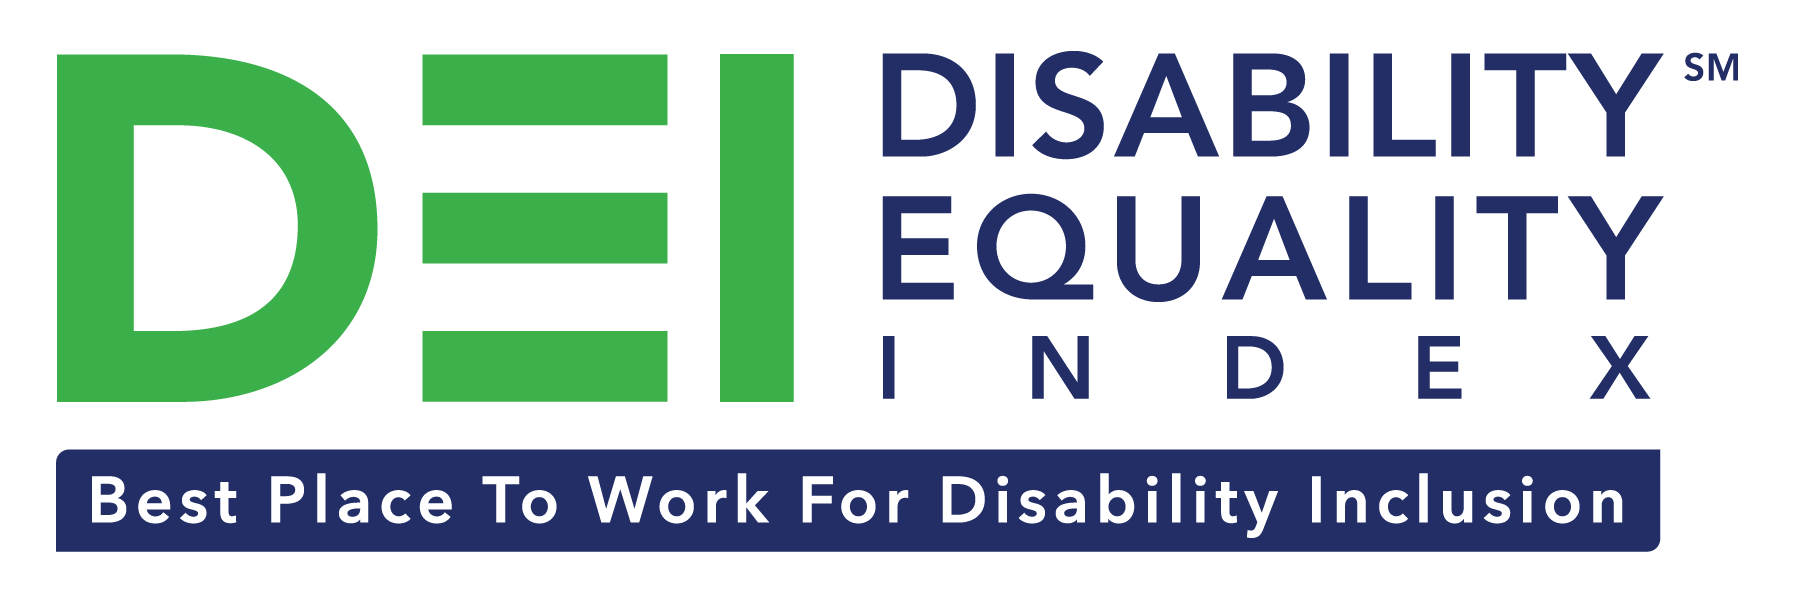 MD Anderson award - DEI 2020 Best Place to Work For Disability Inclusion